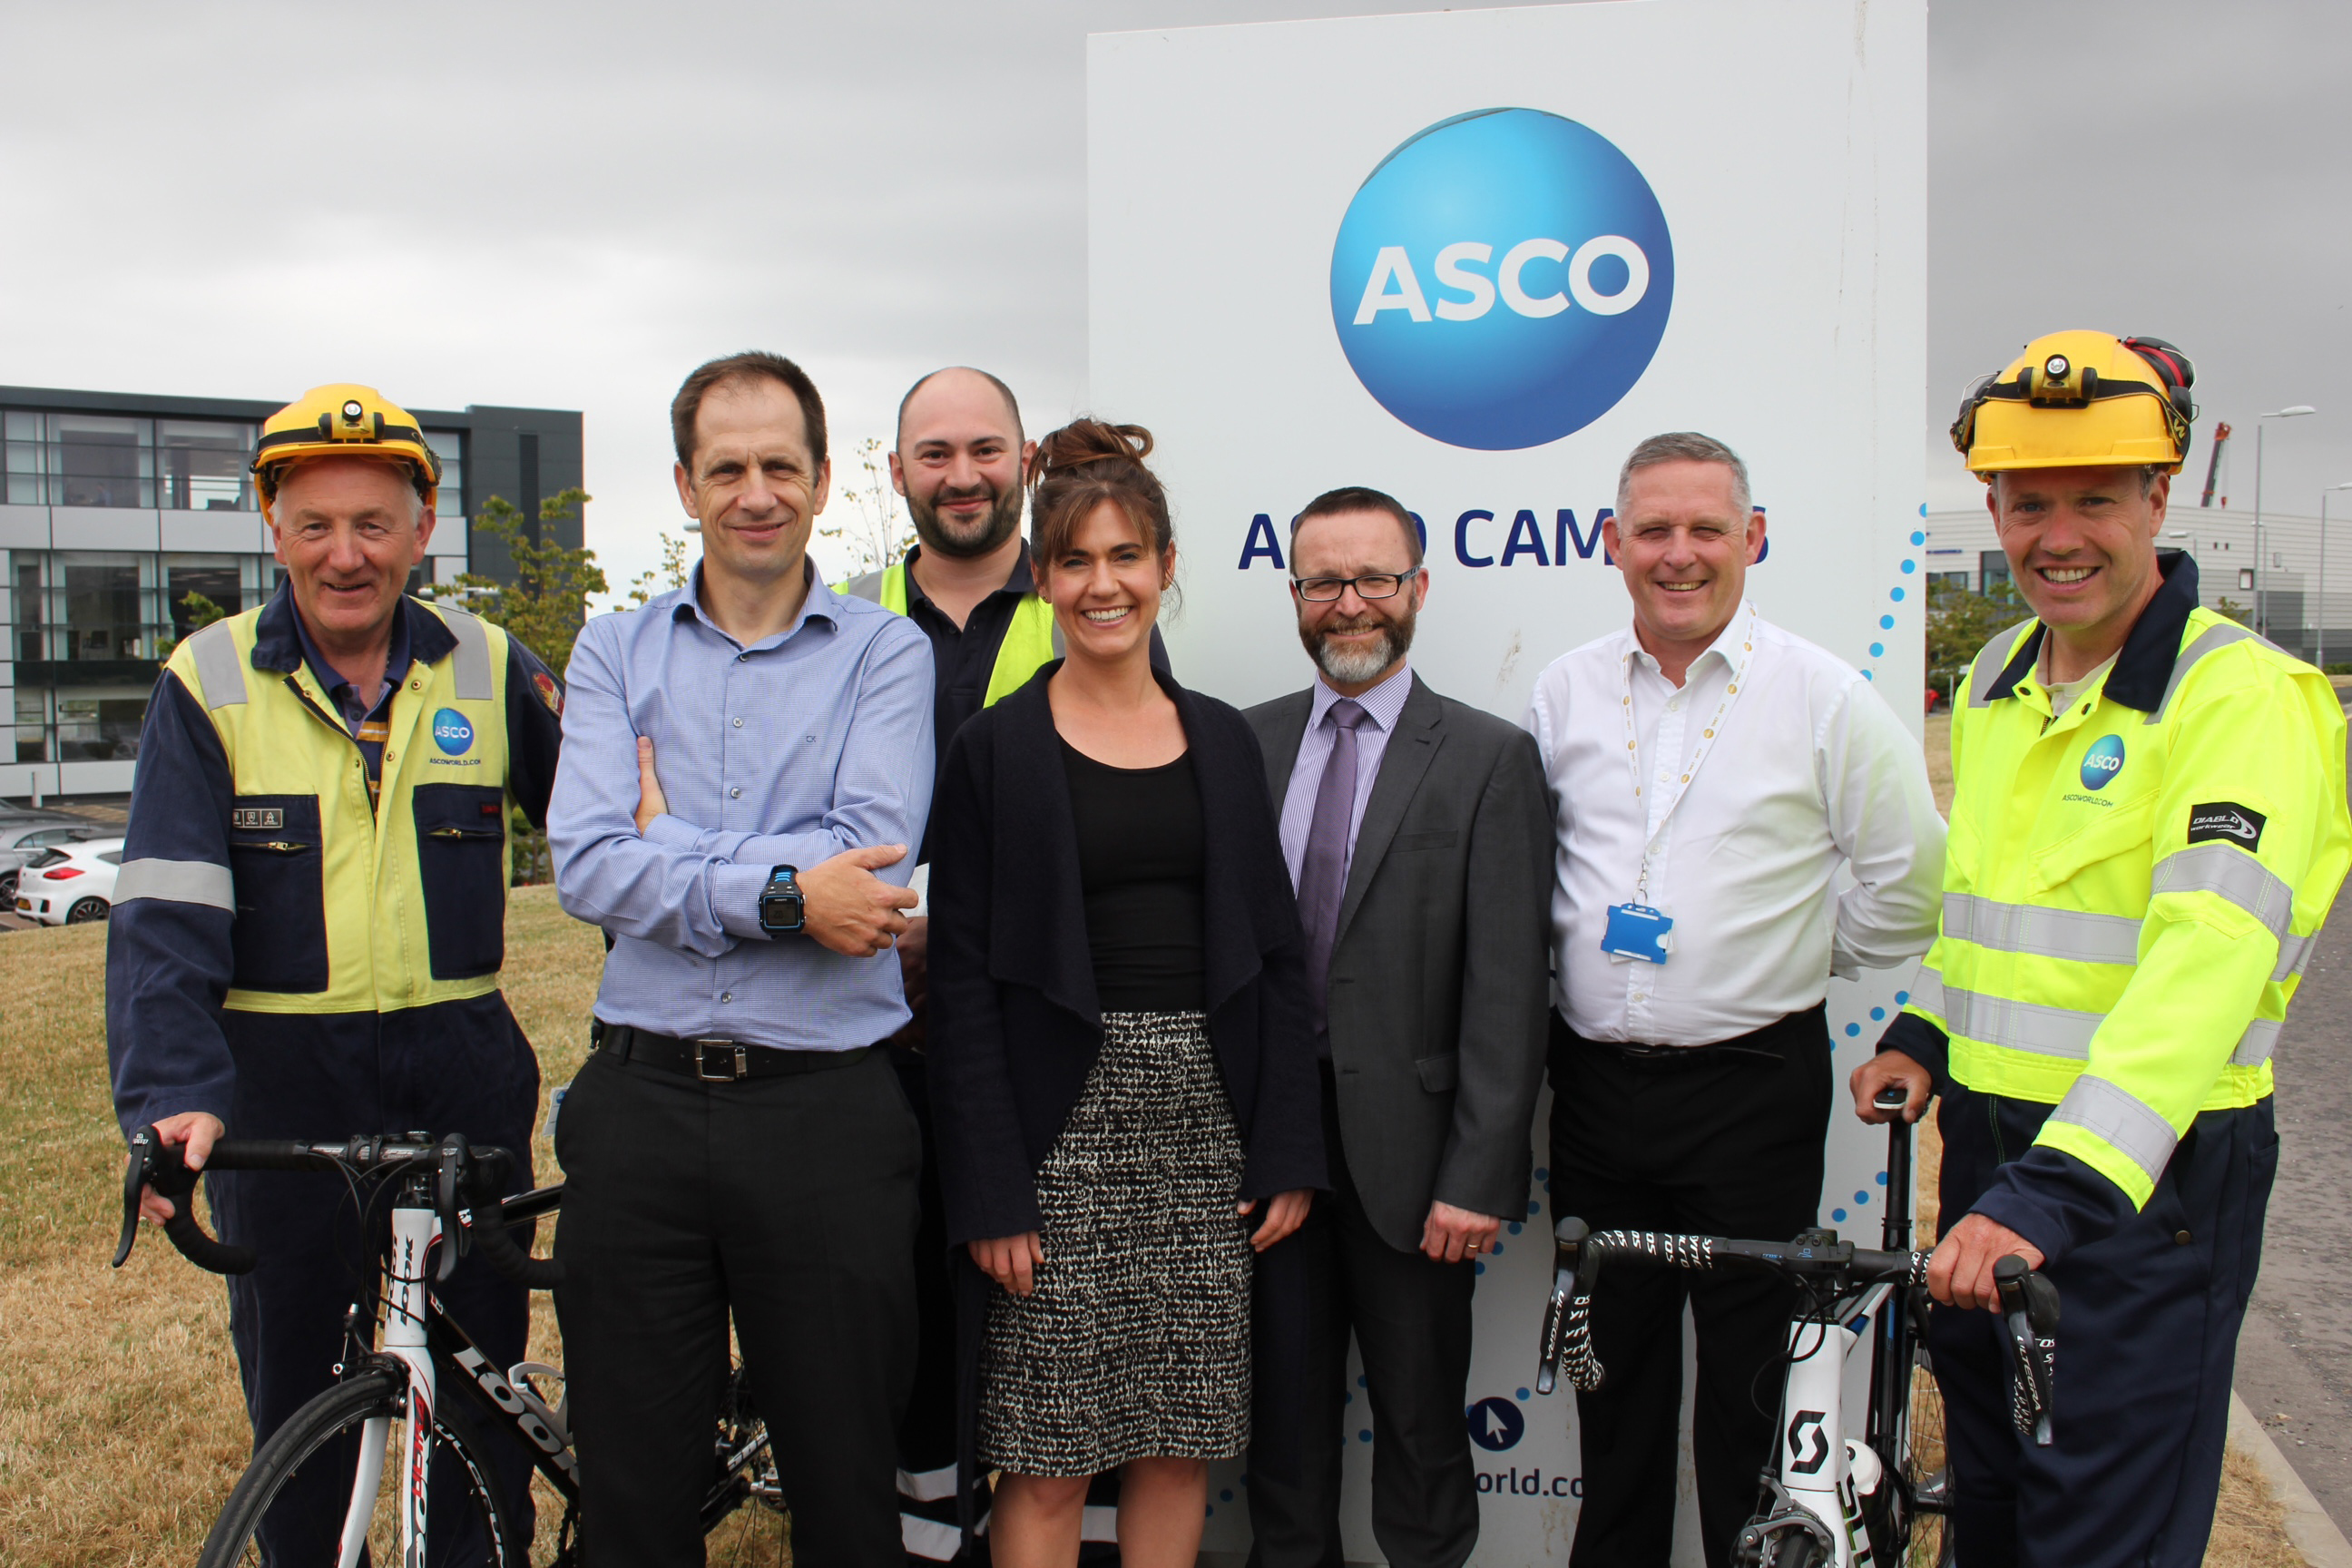 From left, Davy Thomson, Stephen Mundie, Anthony Welsh, Andrea Canale, Julian Foley, James Feeney and Peter Watson